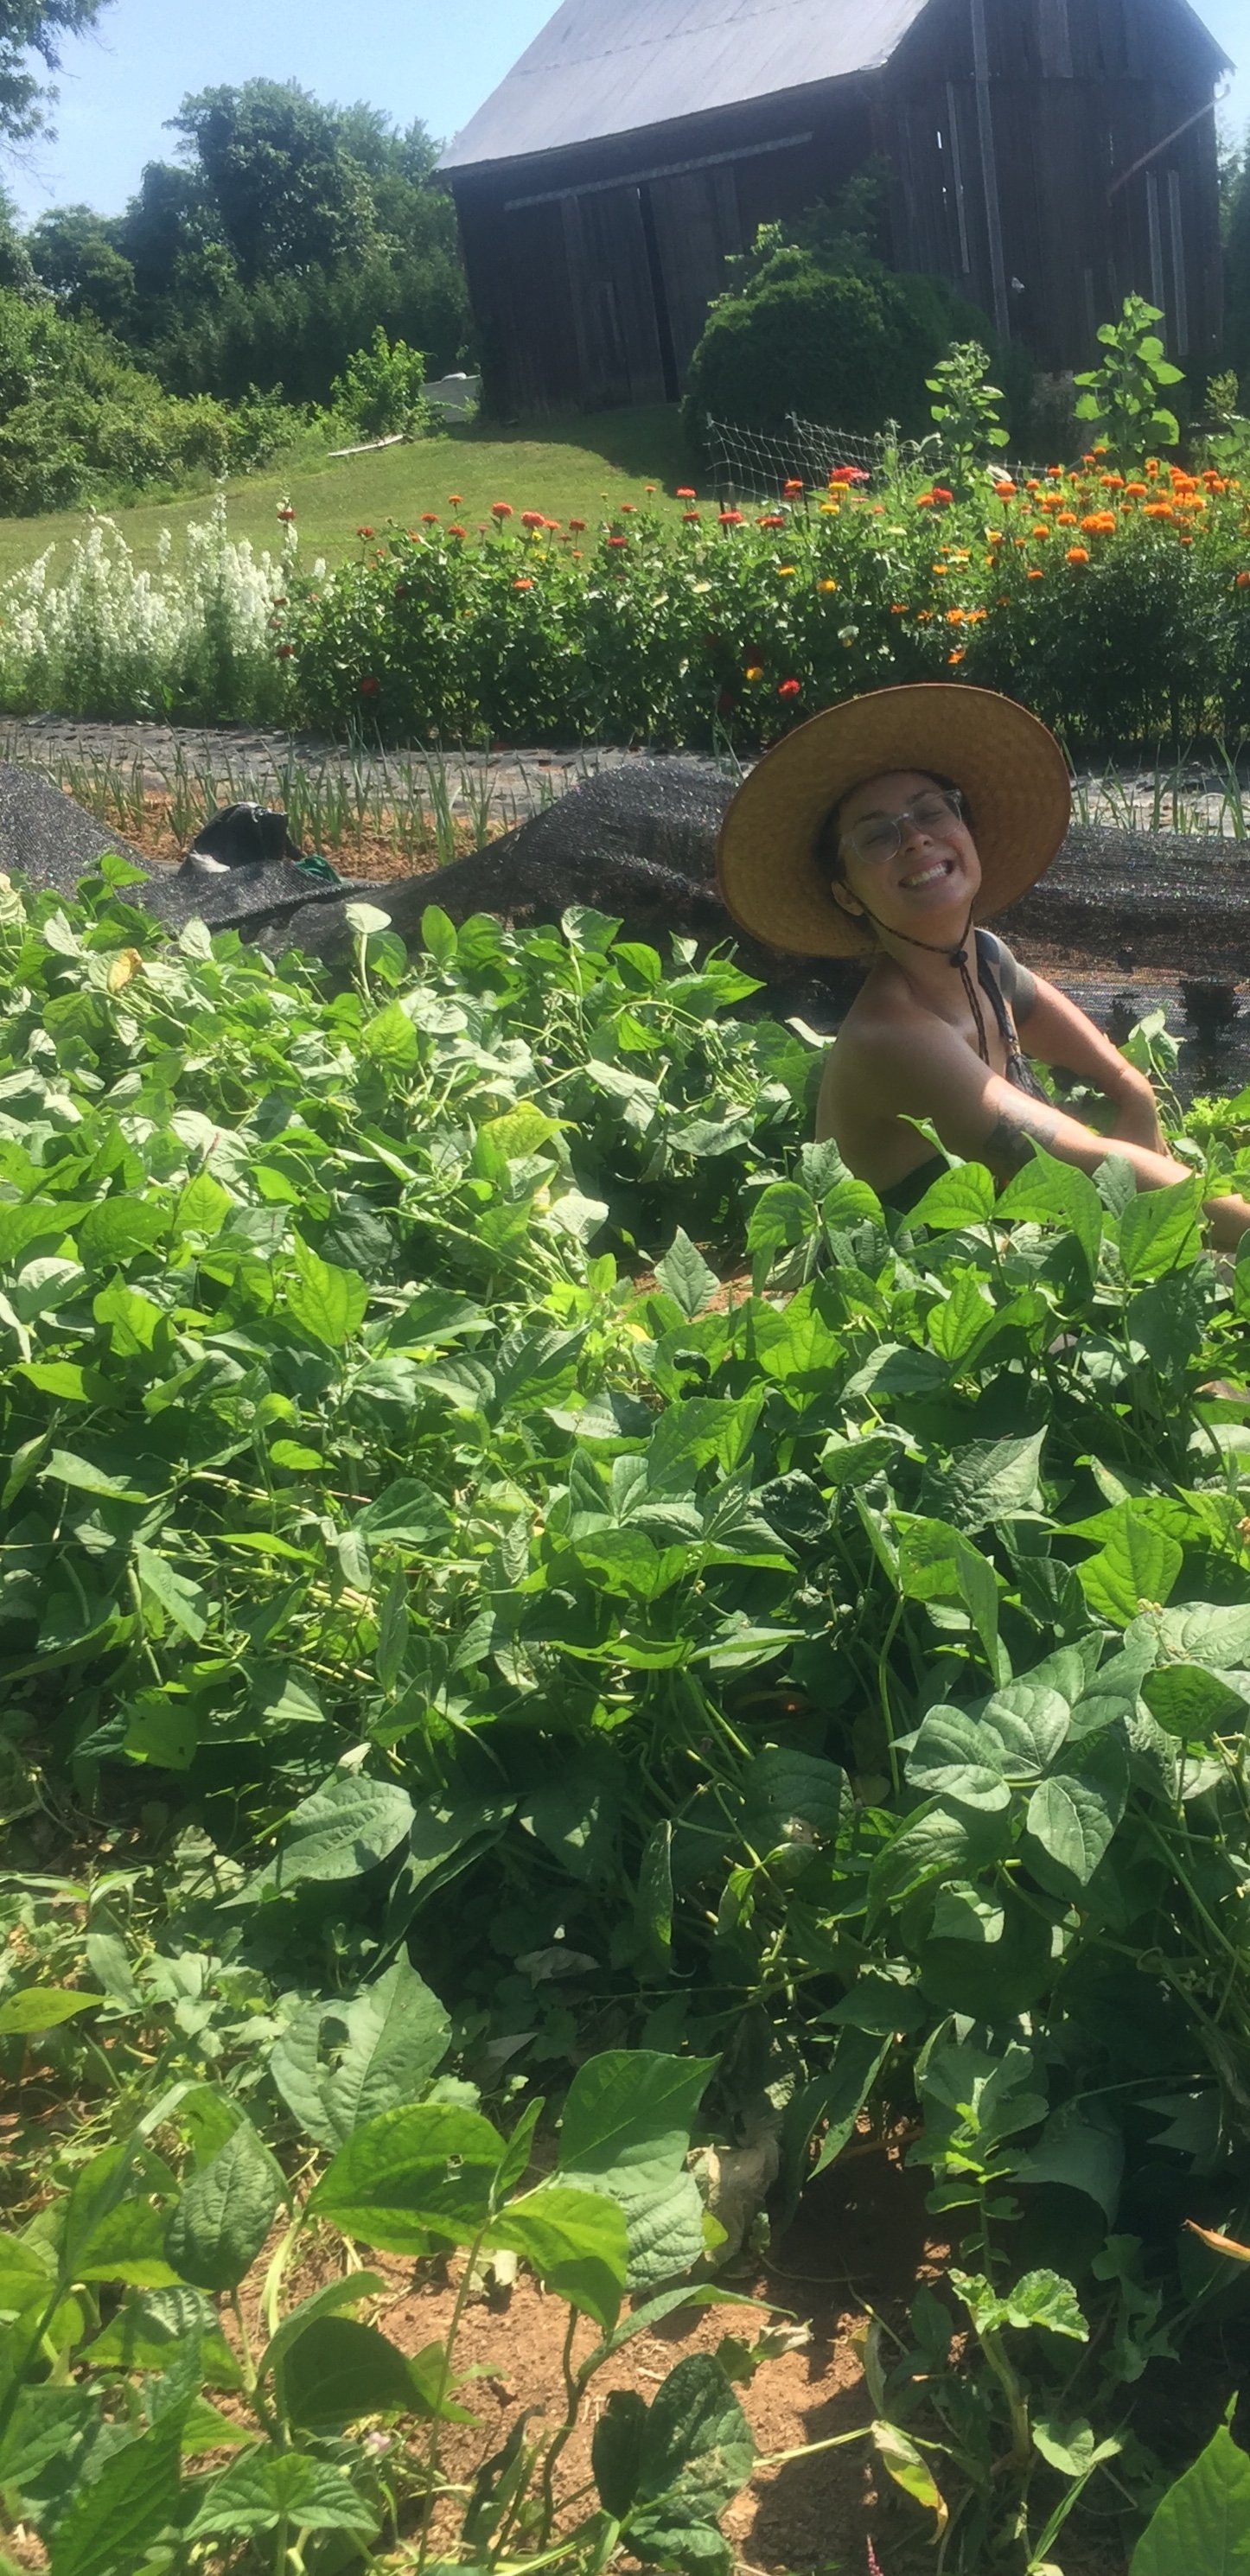 Previous Happening: Farm Happenings for July 9, 2019